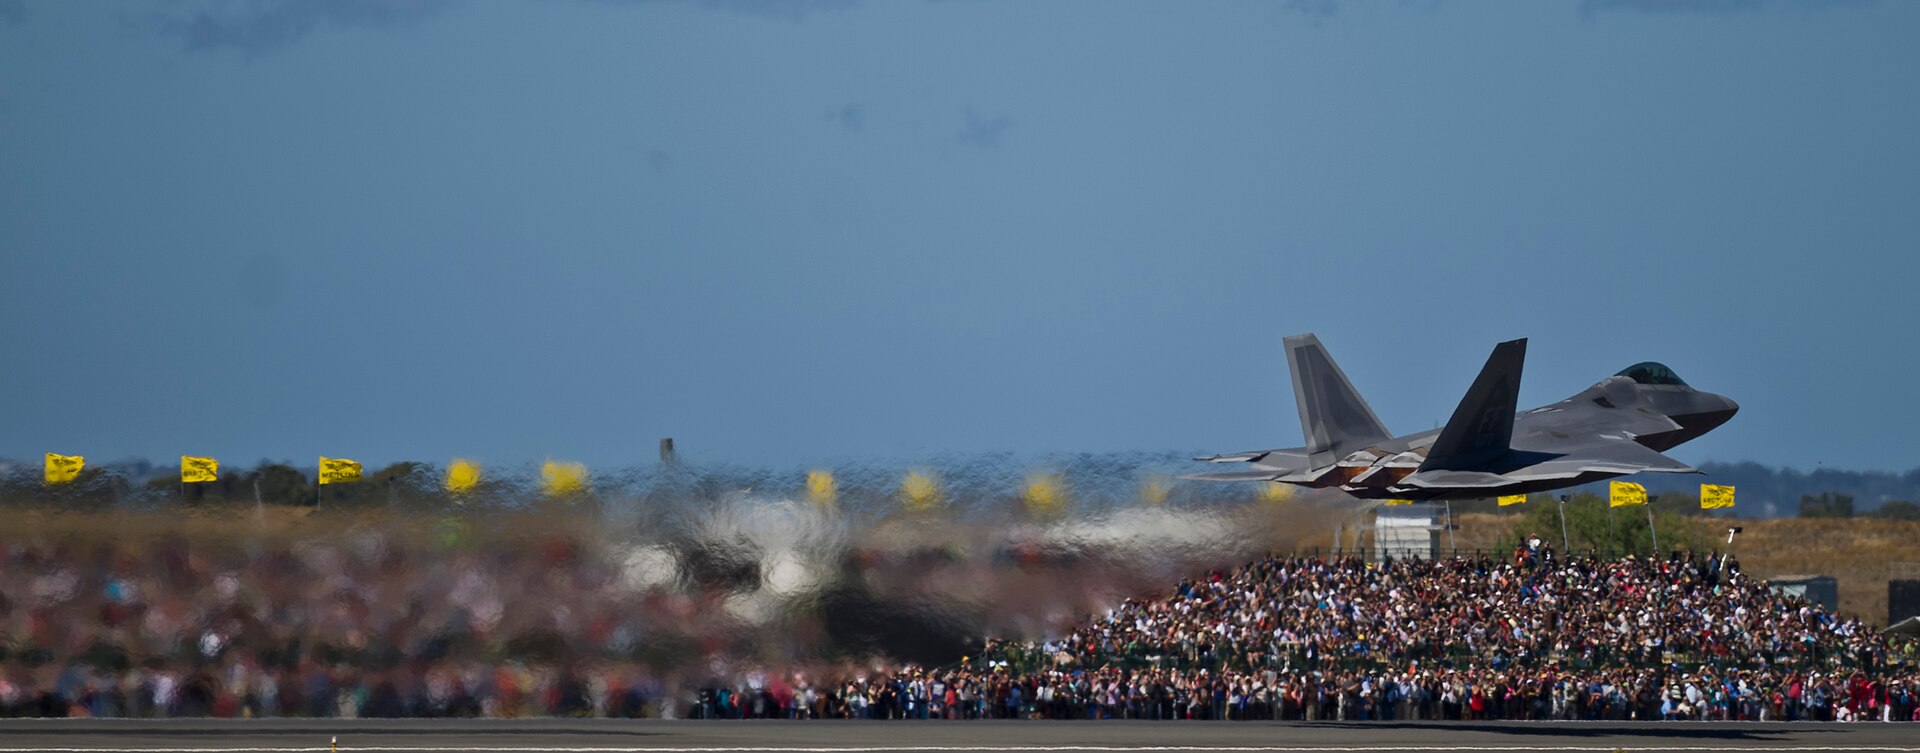 In this file photo, a U.S. Air Force F-22 Raptor from 94th Fighter Squadron Langley Air Force Base, Va., takes off to perform an aerial demonstration for an estimated 180,000 spectators at the Australian International Airshow, March 2, 2013, at Avalon Airport in Geelong, Australia. The Australian International Airshow 2013 (AIA13) is held biennially, and is one of the largest international trade shows in the Pacific. U.S. Pacific Command (USPACOM) participation in AIA13 directly supports theater engagement goals and objectives and further enhances relationships with other Pacific nations. 